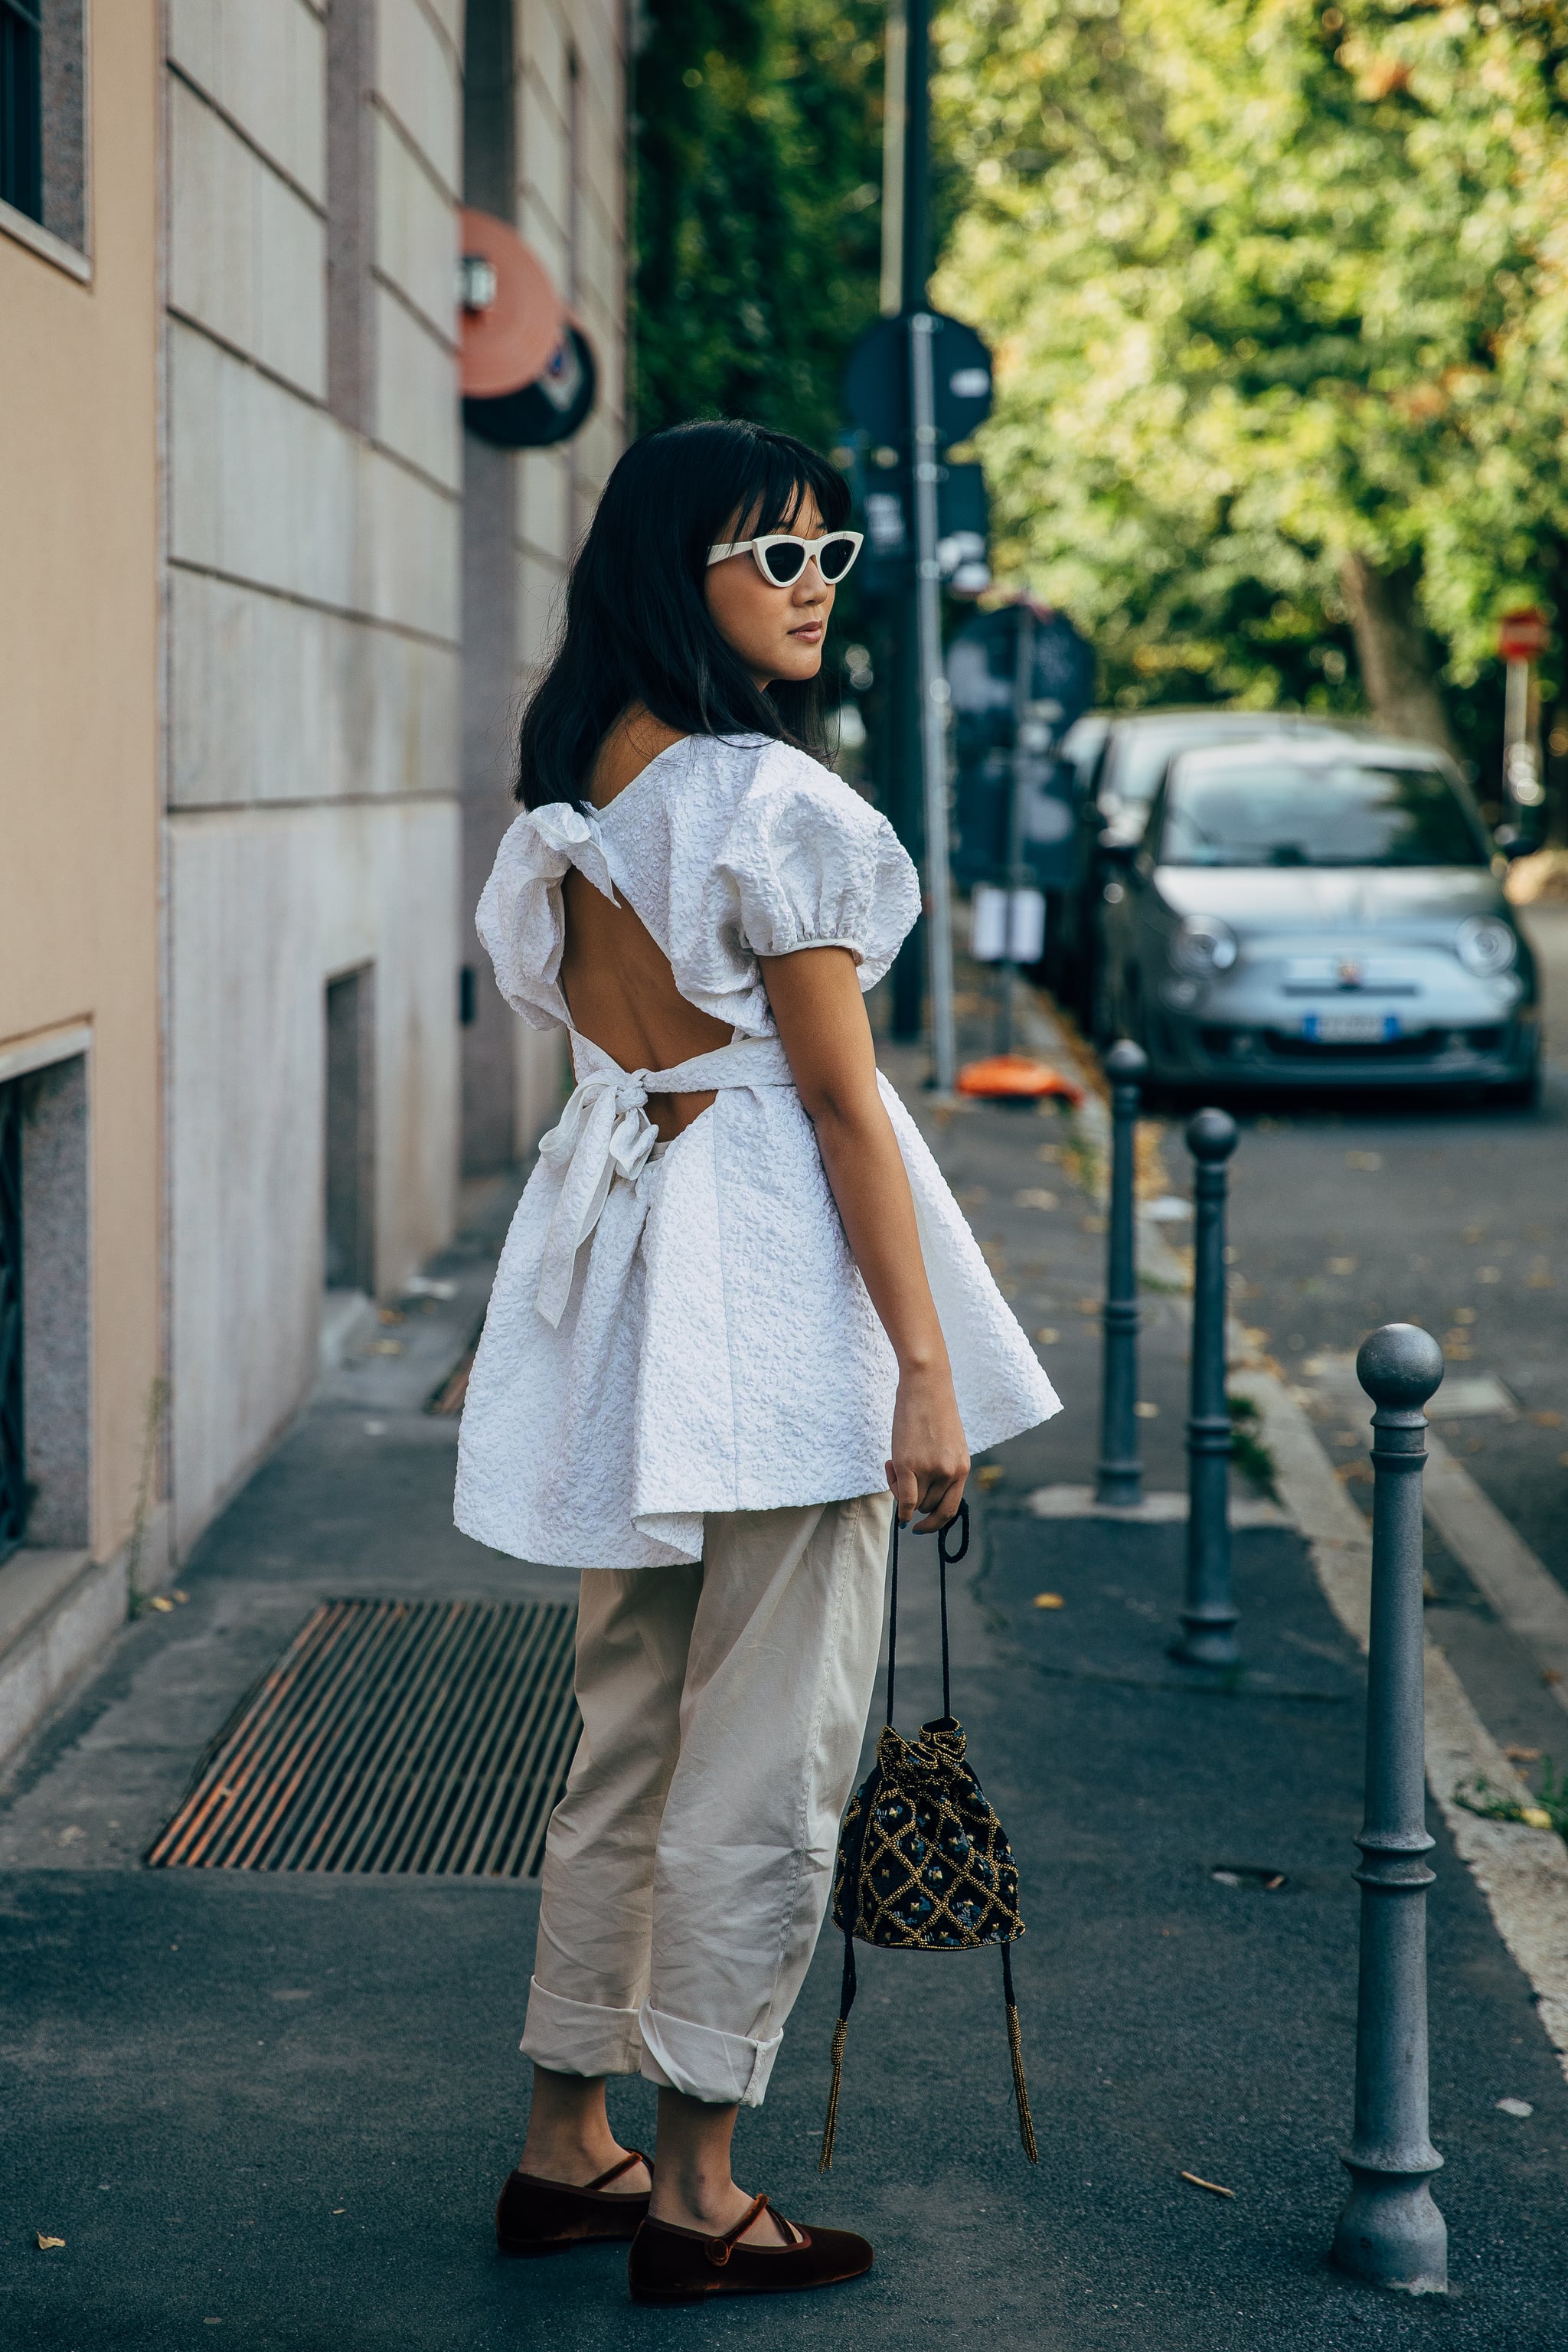 EM Streetstyle  Urban outfits, Casual chic style, Fashion